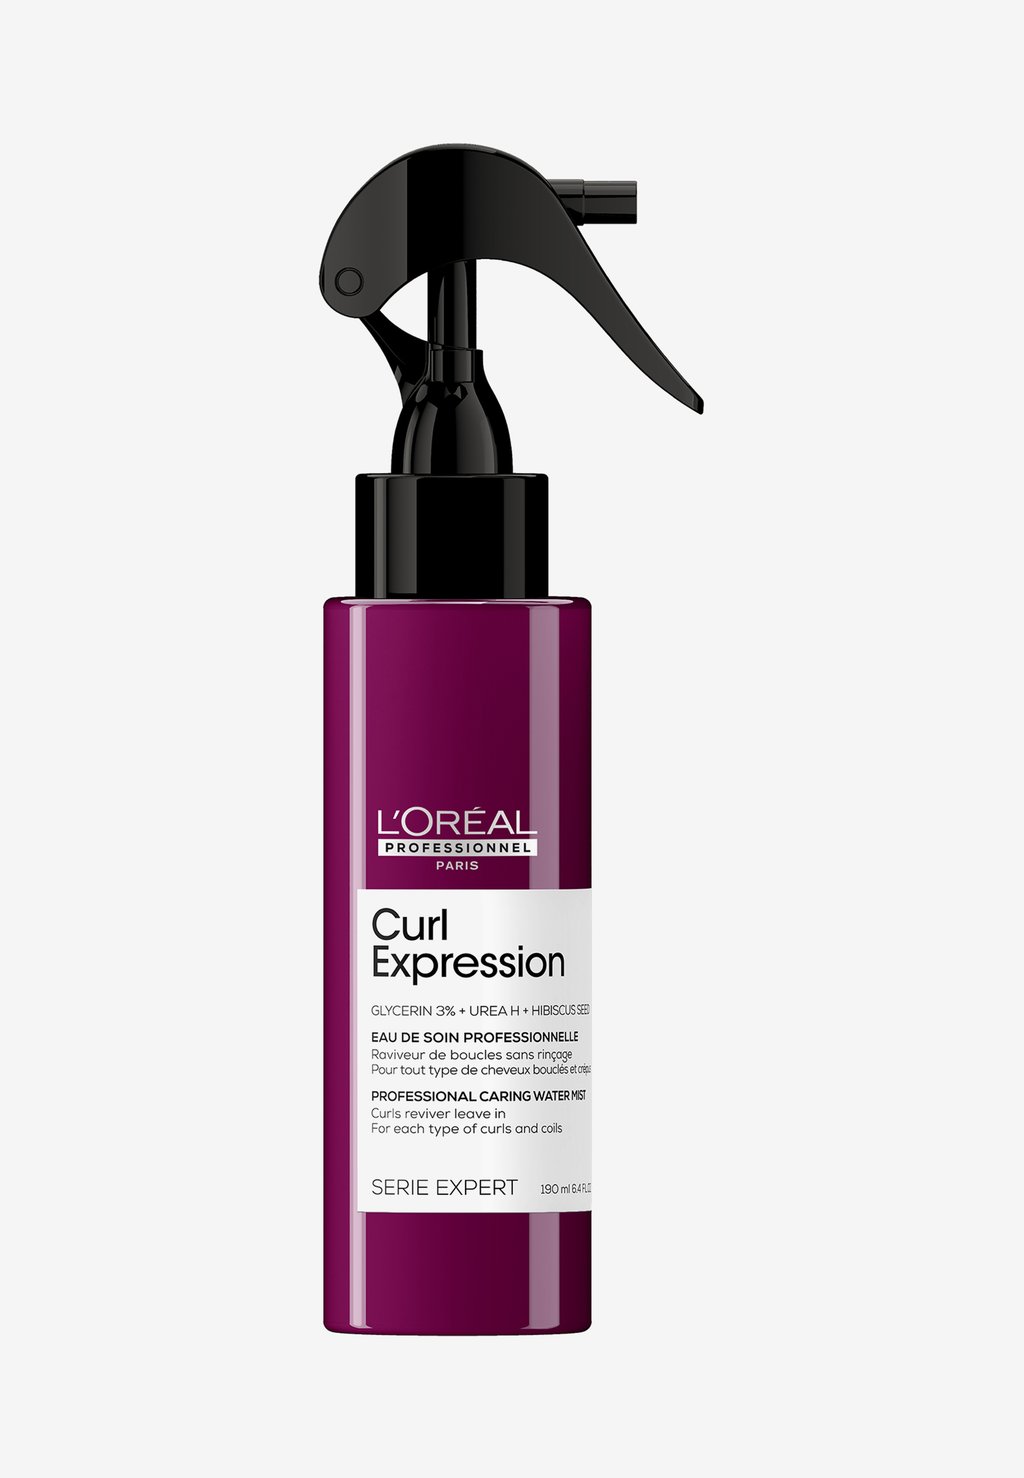 Стайлинг CURL EXPRESSIONCURLS REVIVER LEAVE-IN FOR WAVY, CURLY AND COILY HAIR L'OREAL PROFESSIONNEL